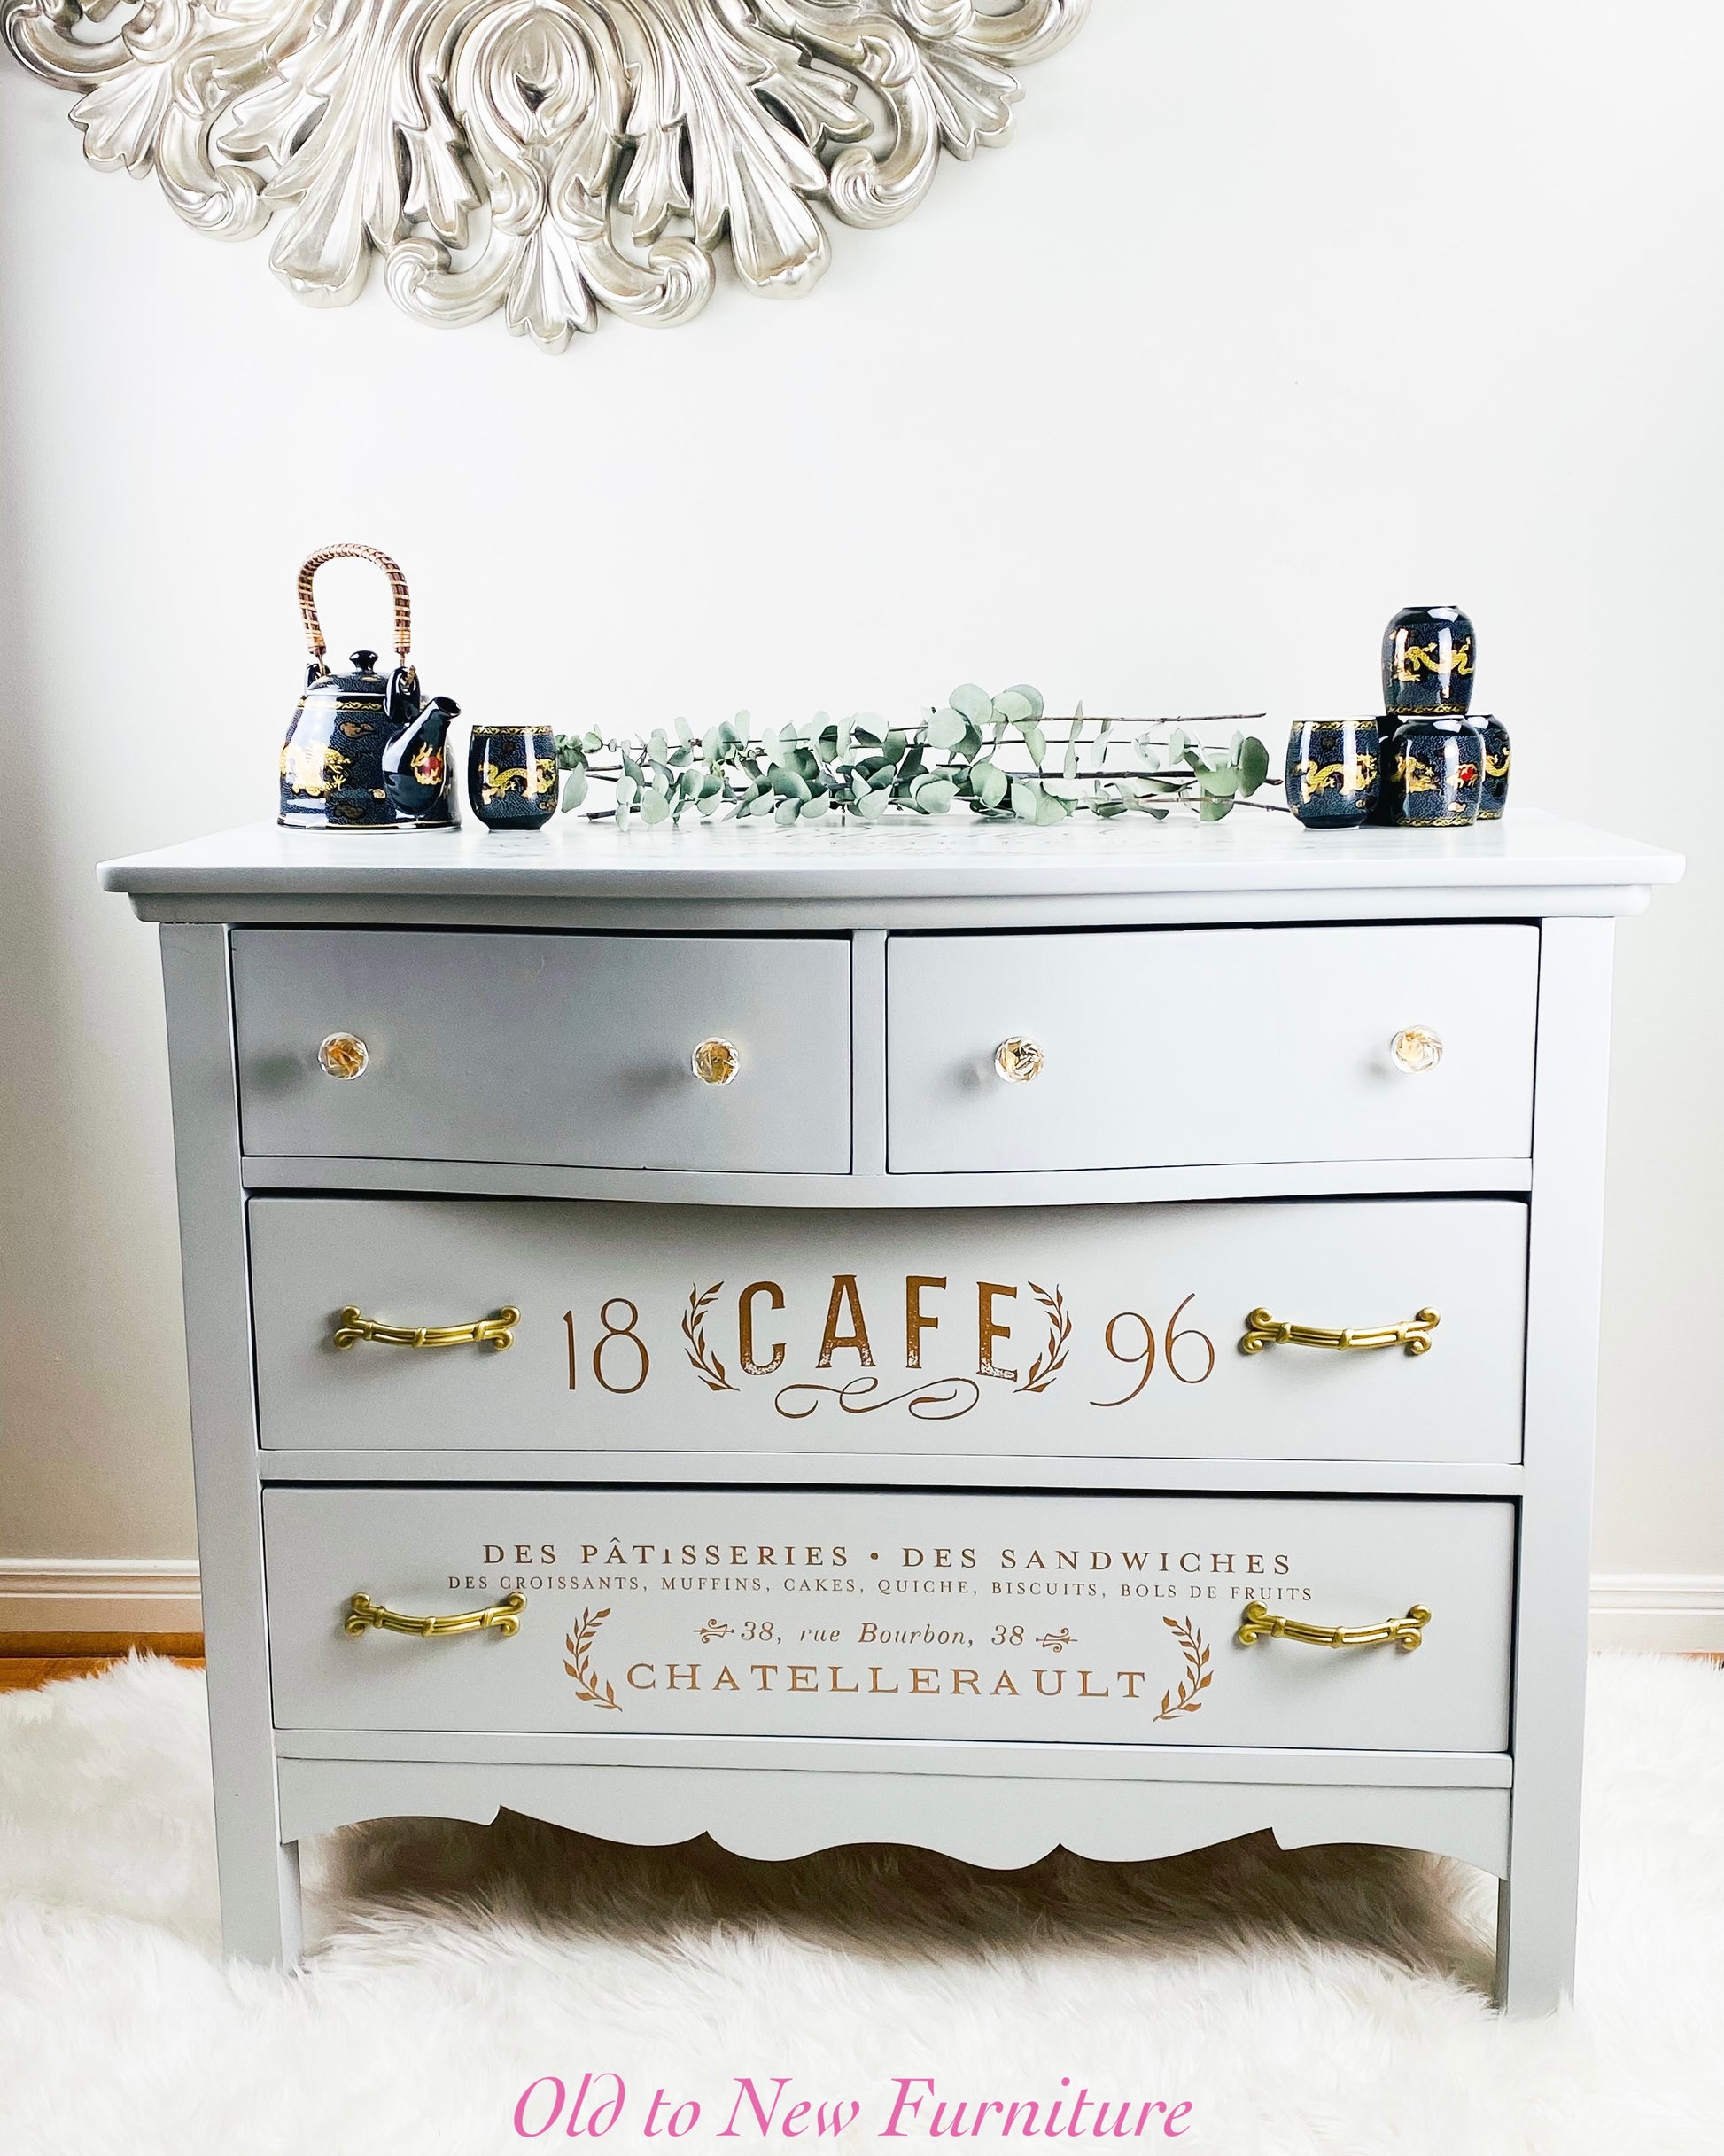 Fabulous Antique Sideboard Painted Light Grey With Gold Scrip Details